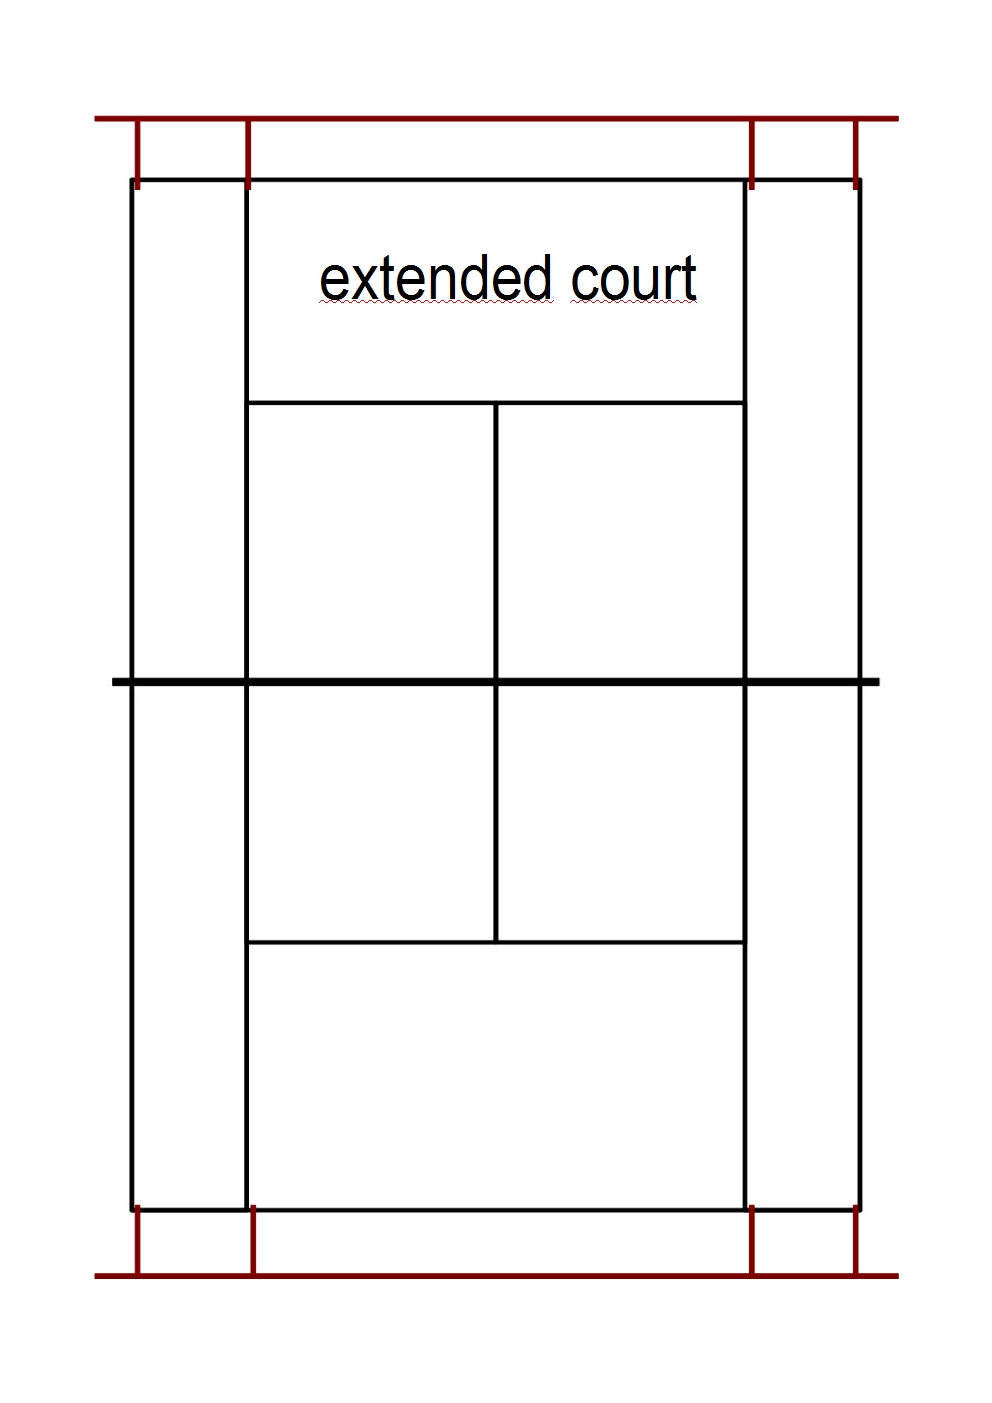 extended_court